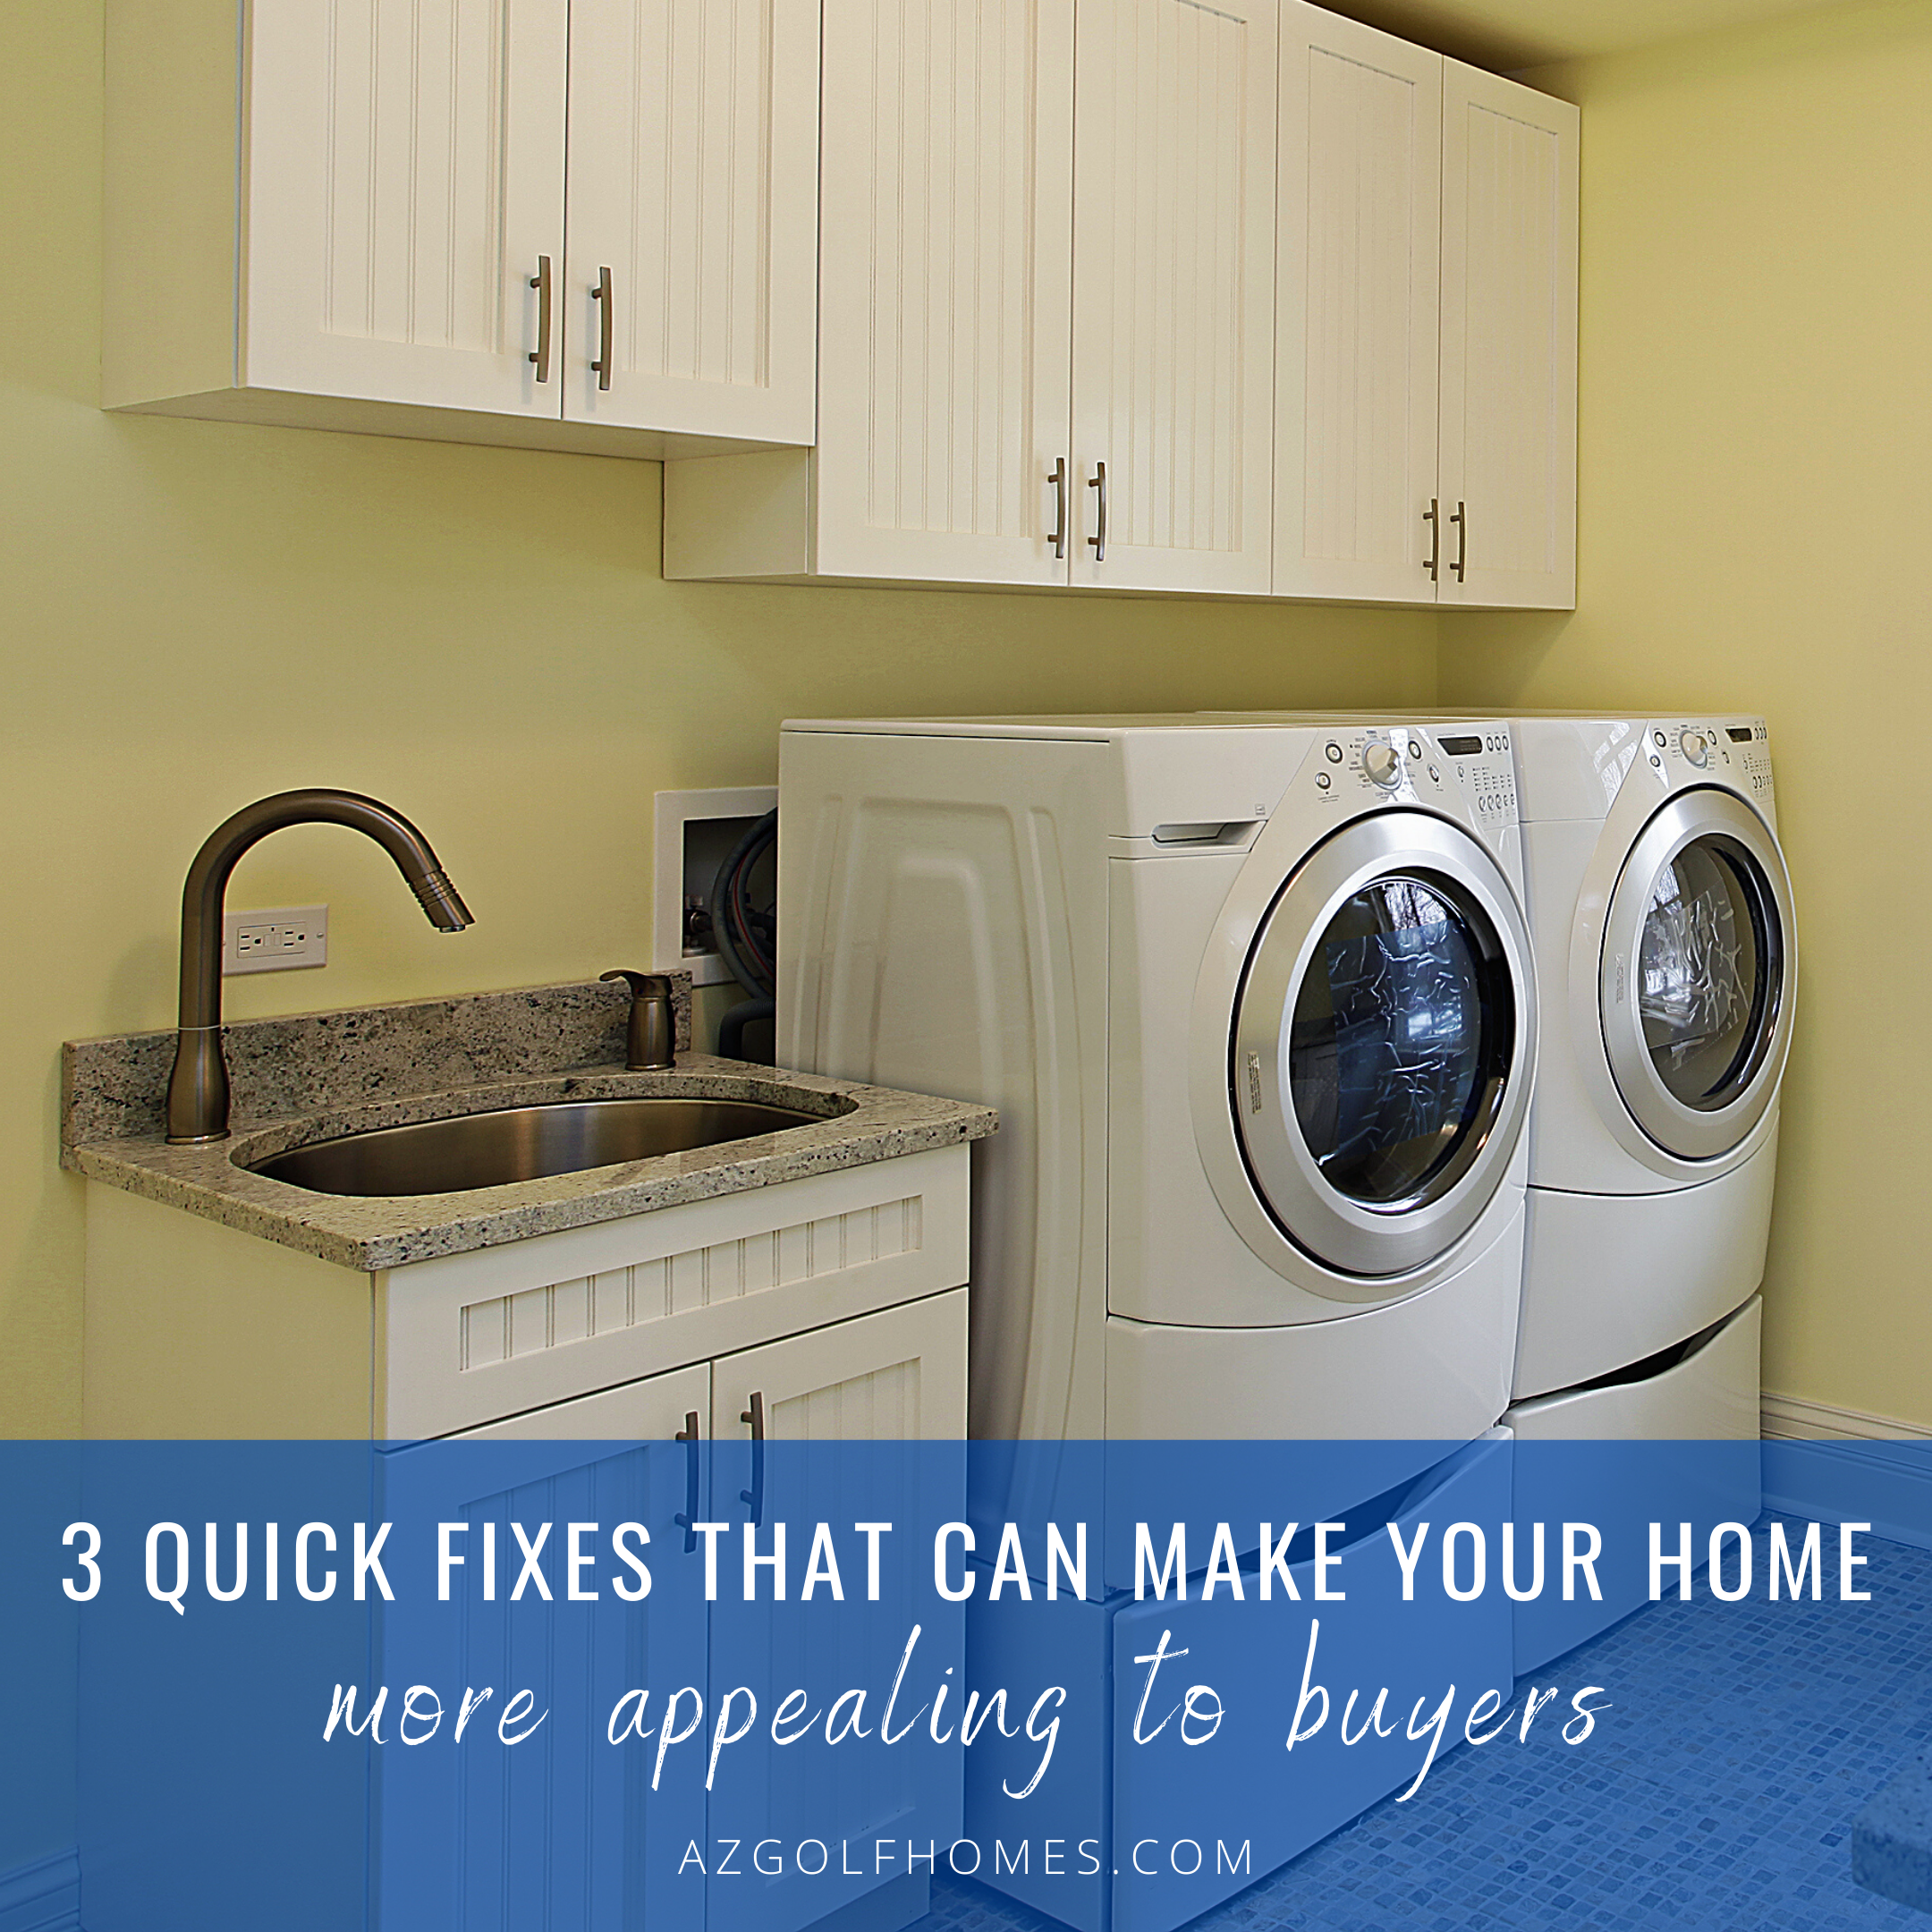 3 Quick Fixes That Can Make Your Home More Appealing to Prospective Buyers